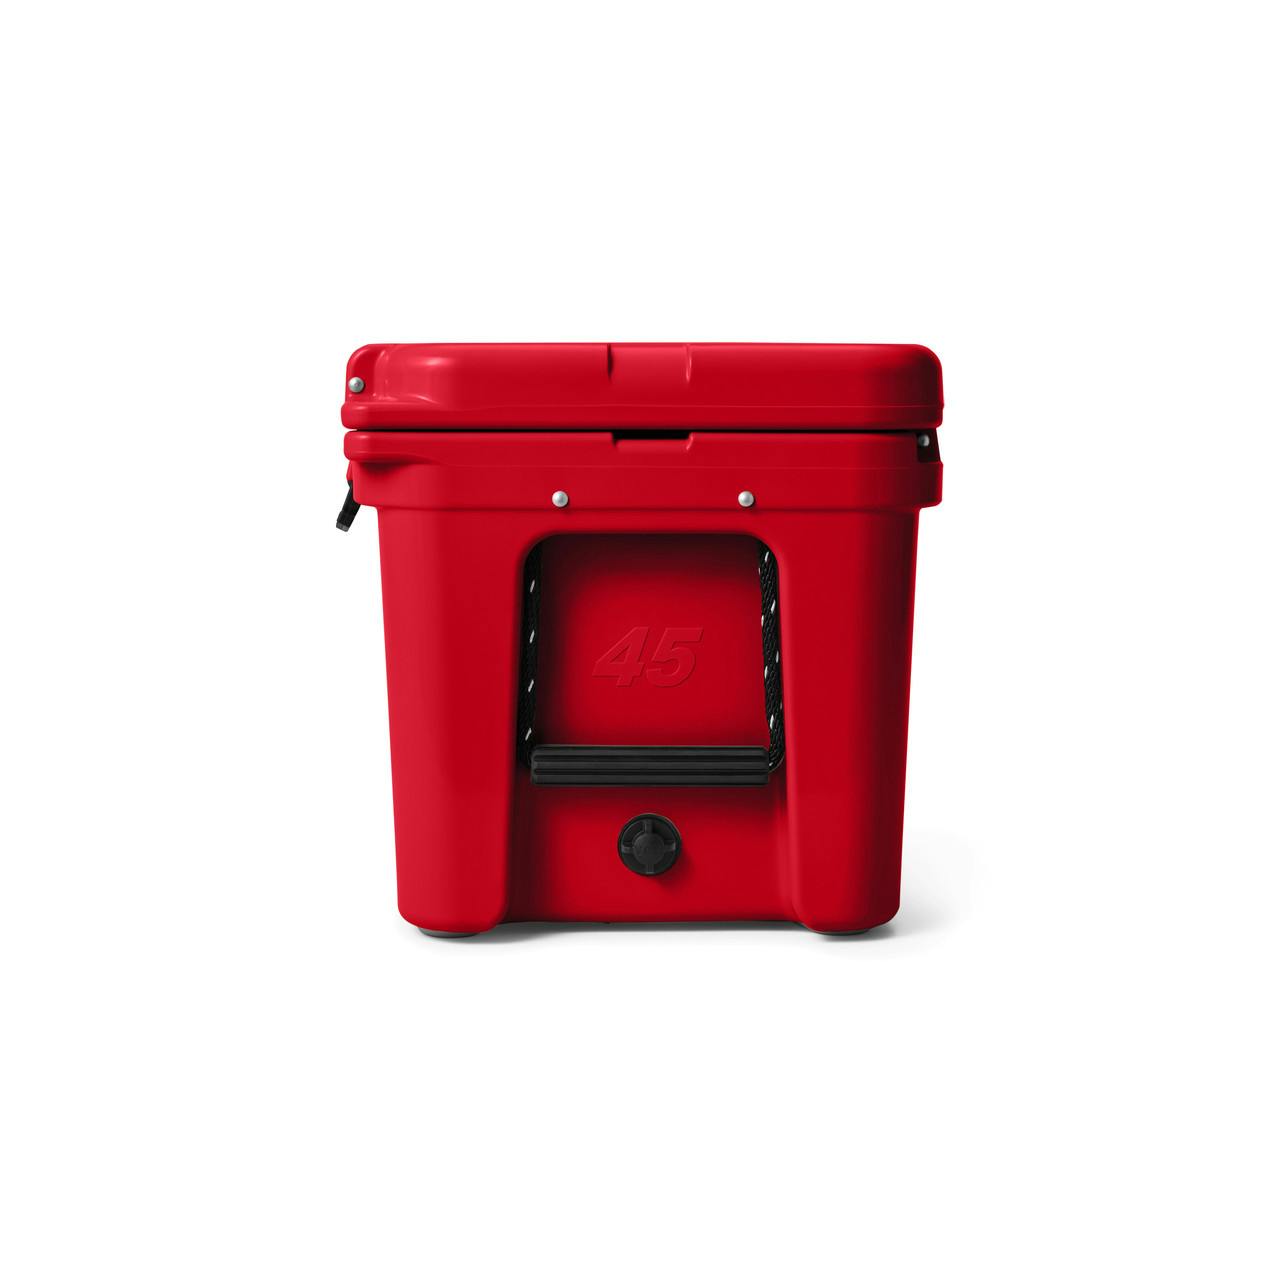 Tundra 45 Hard Cooler Rescue Red